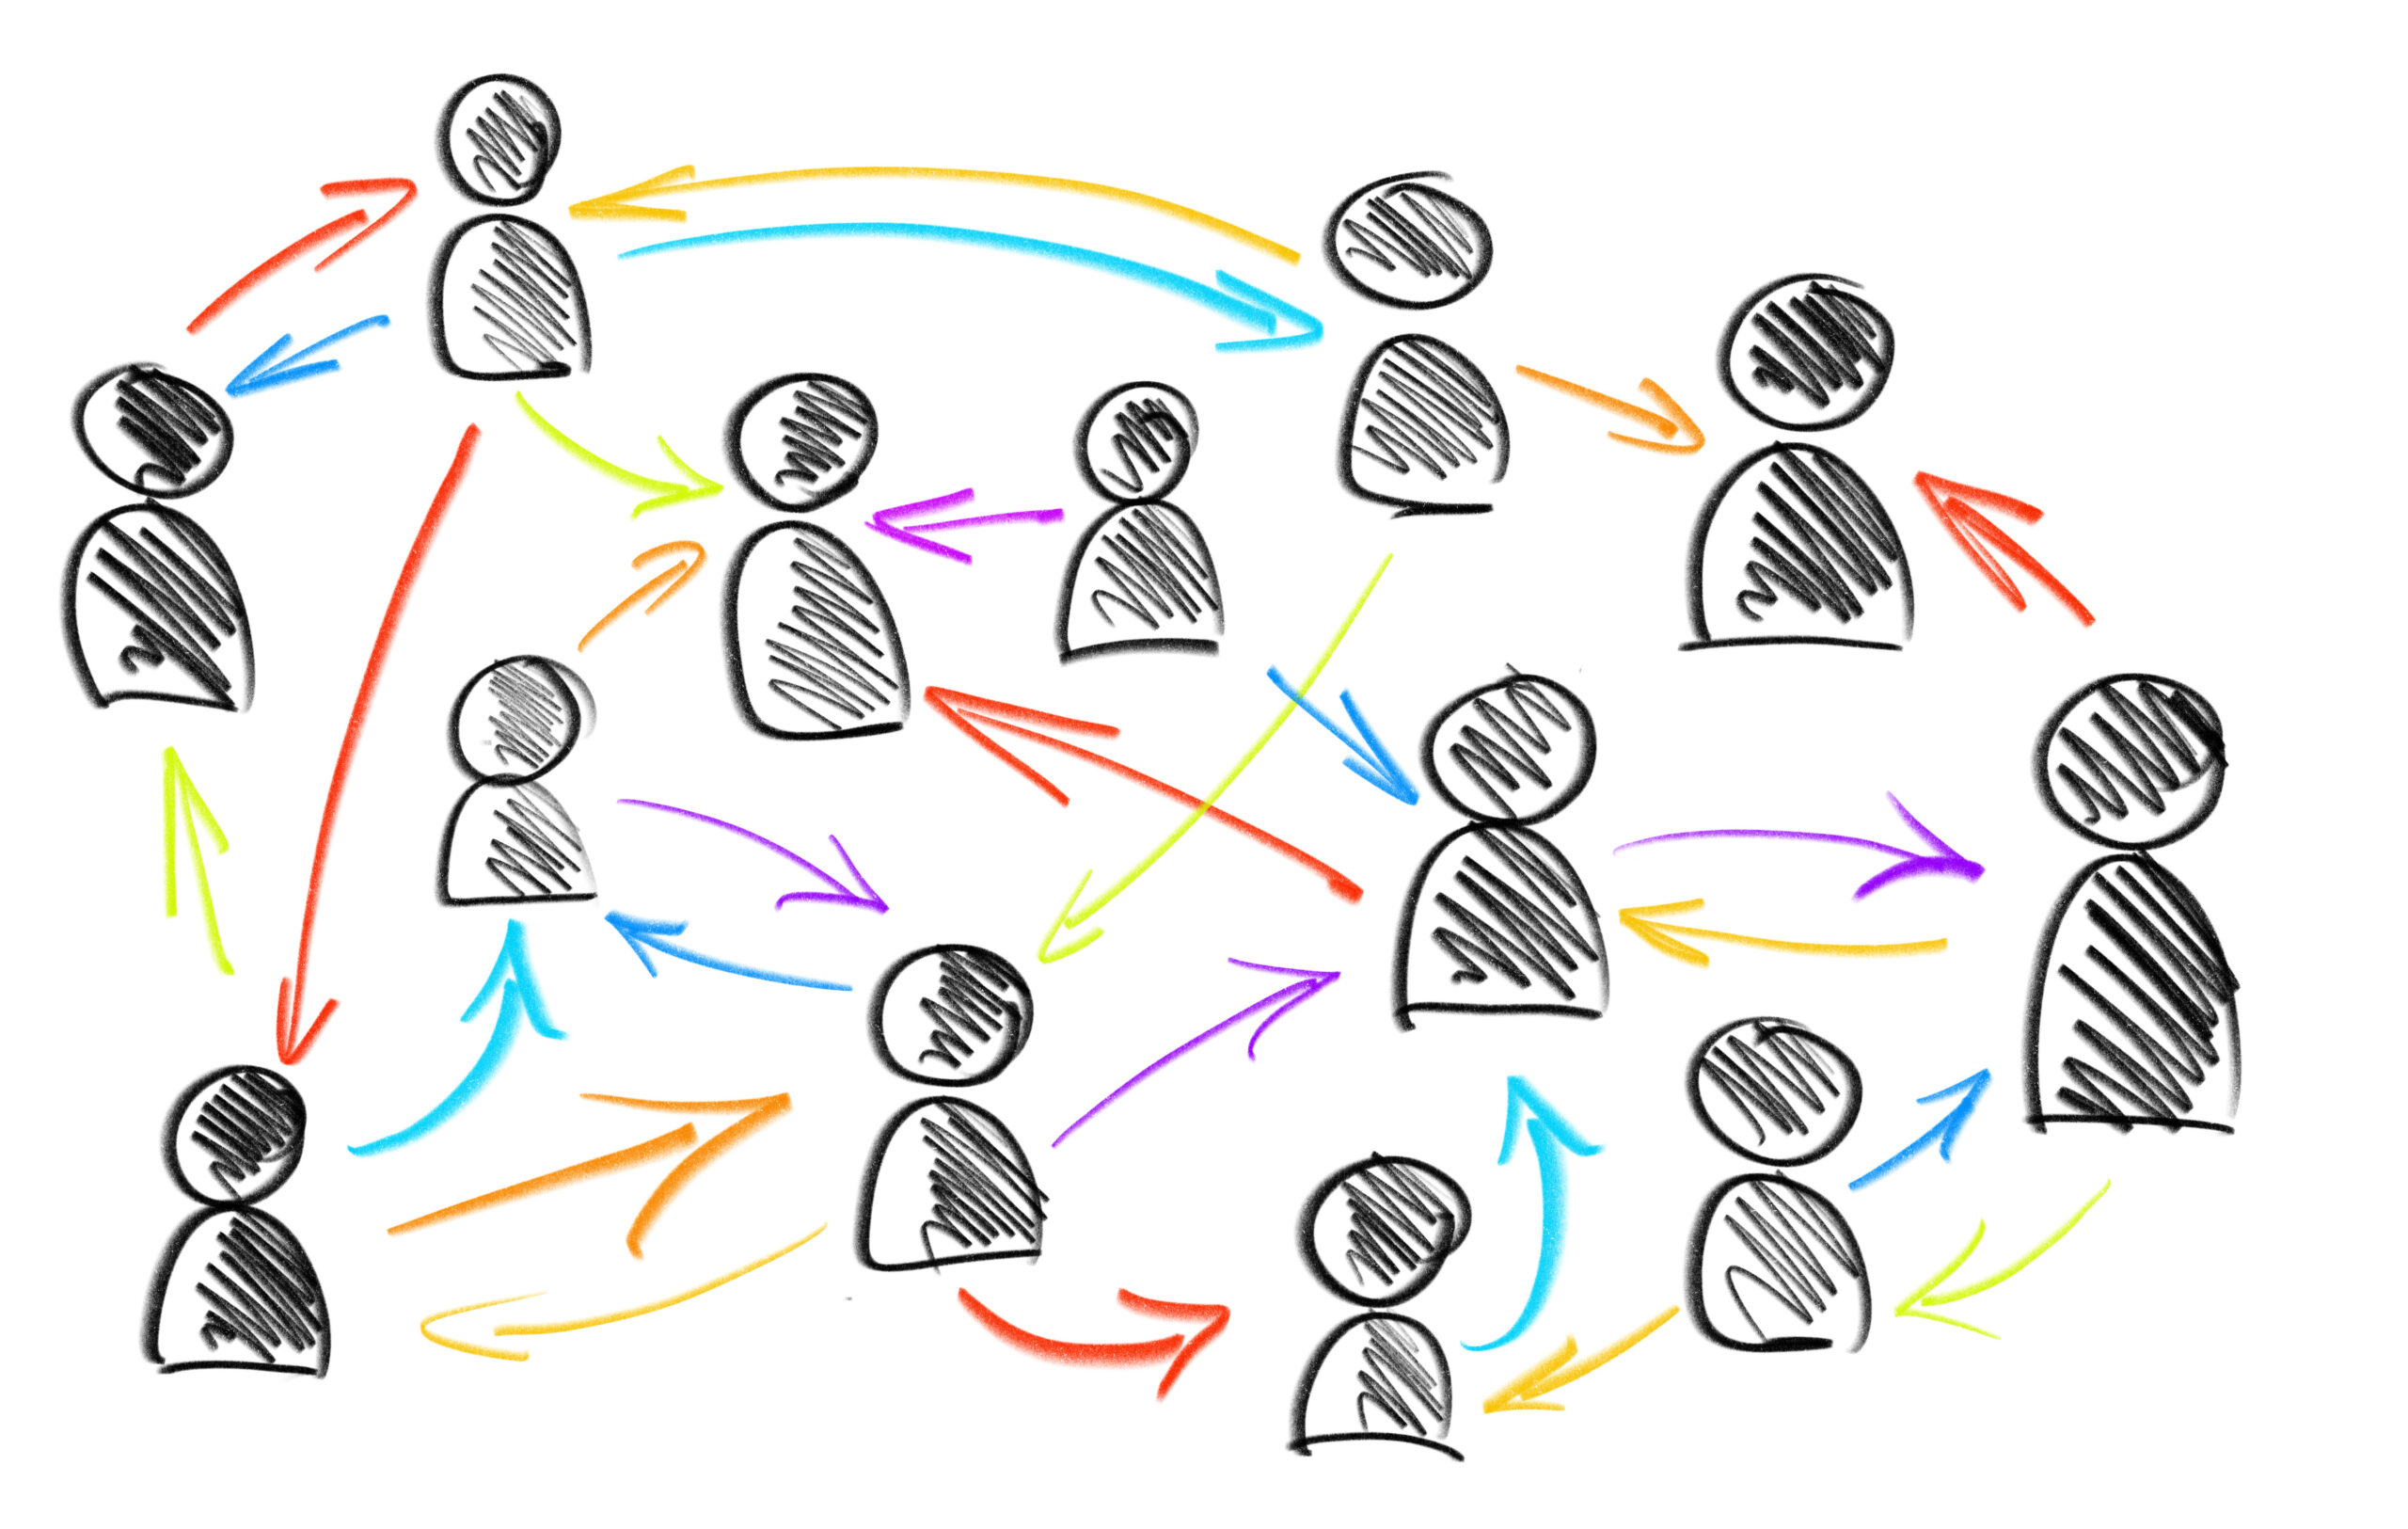 Drawing of people in a network